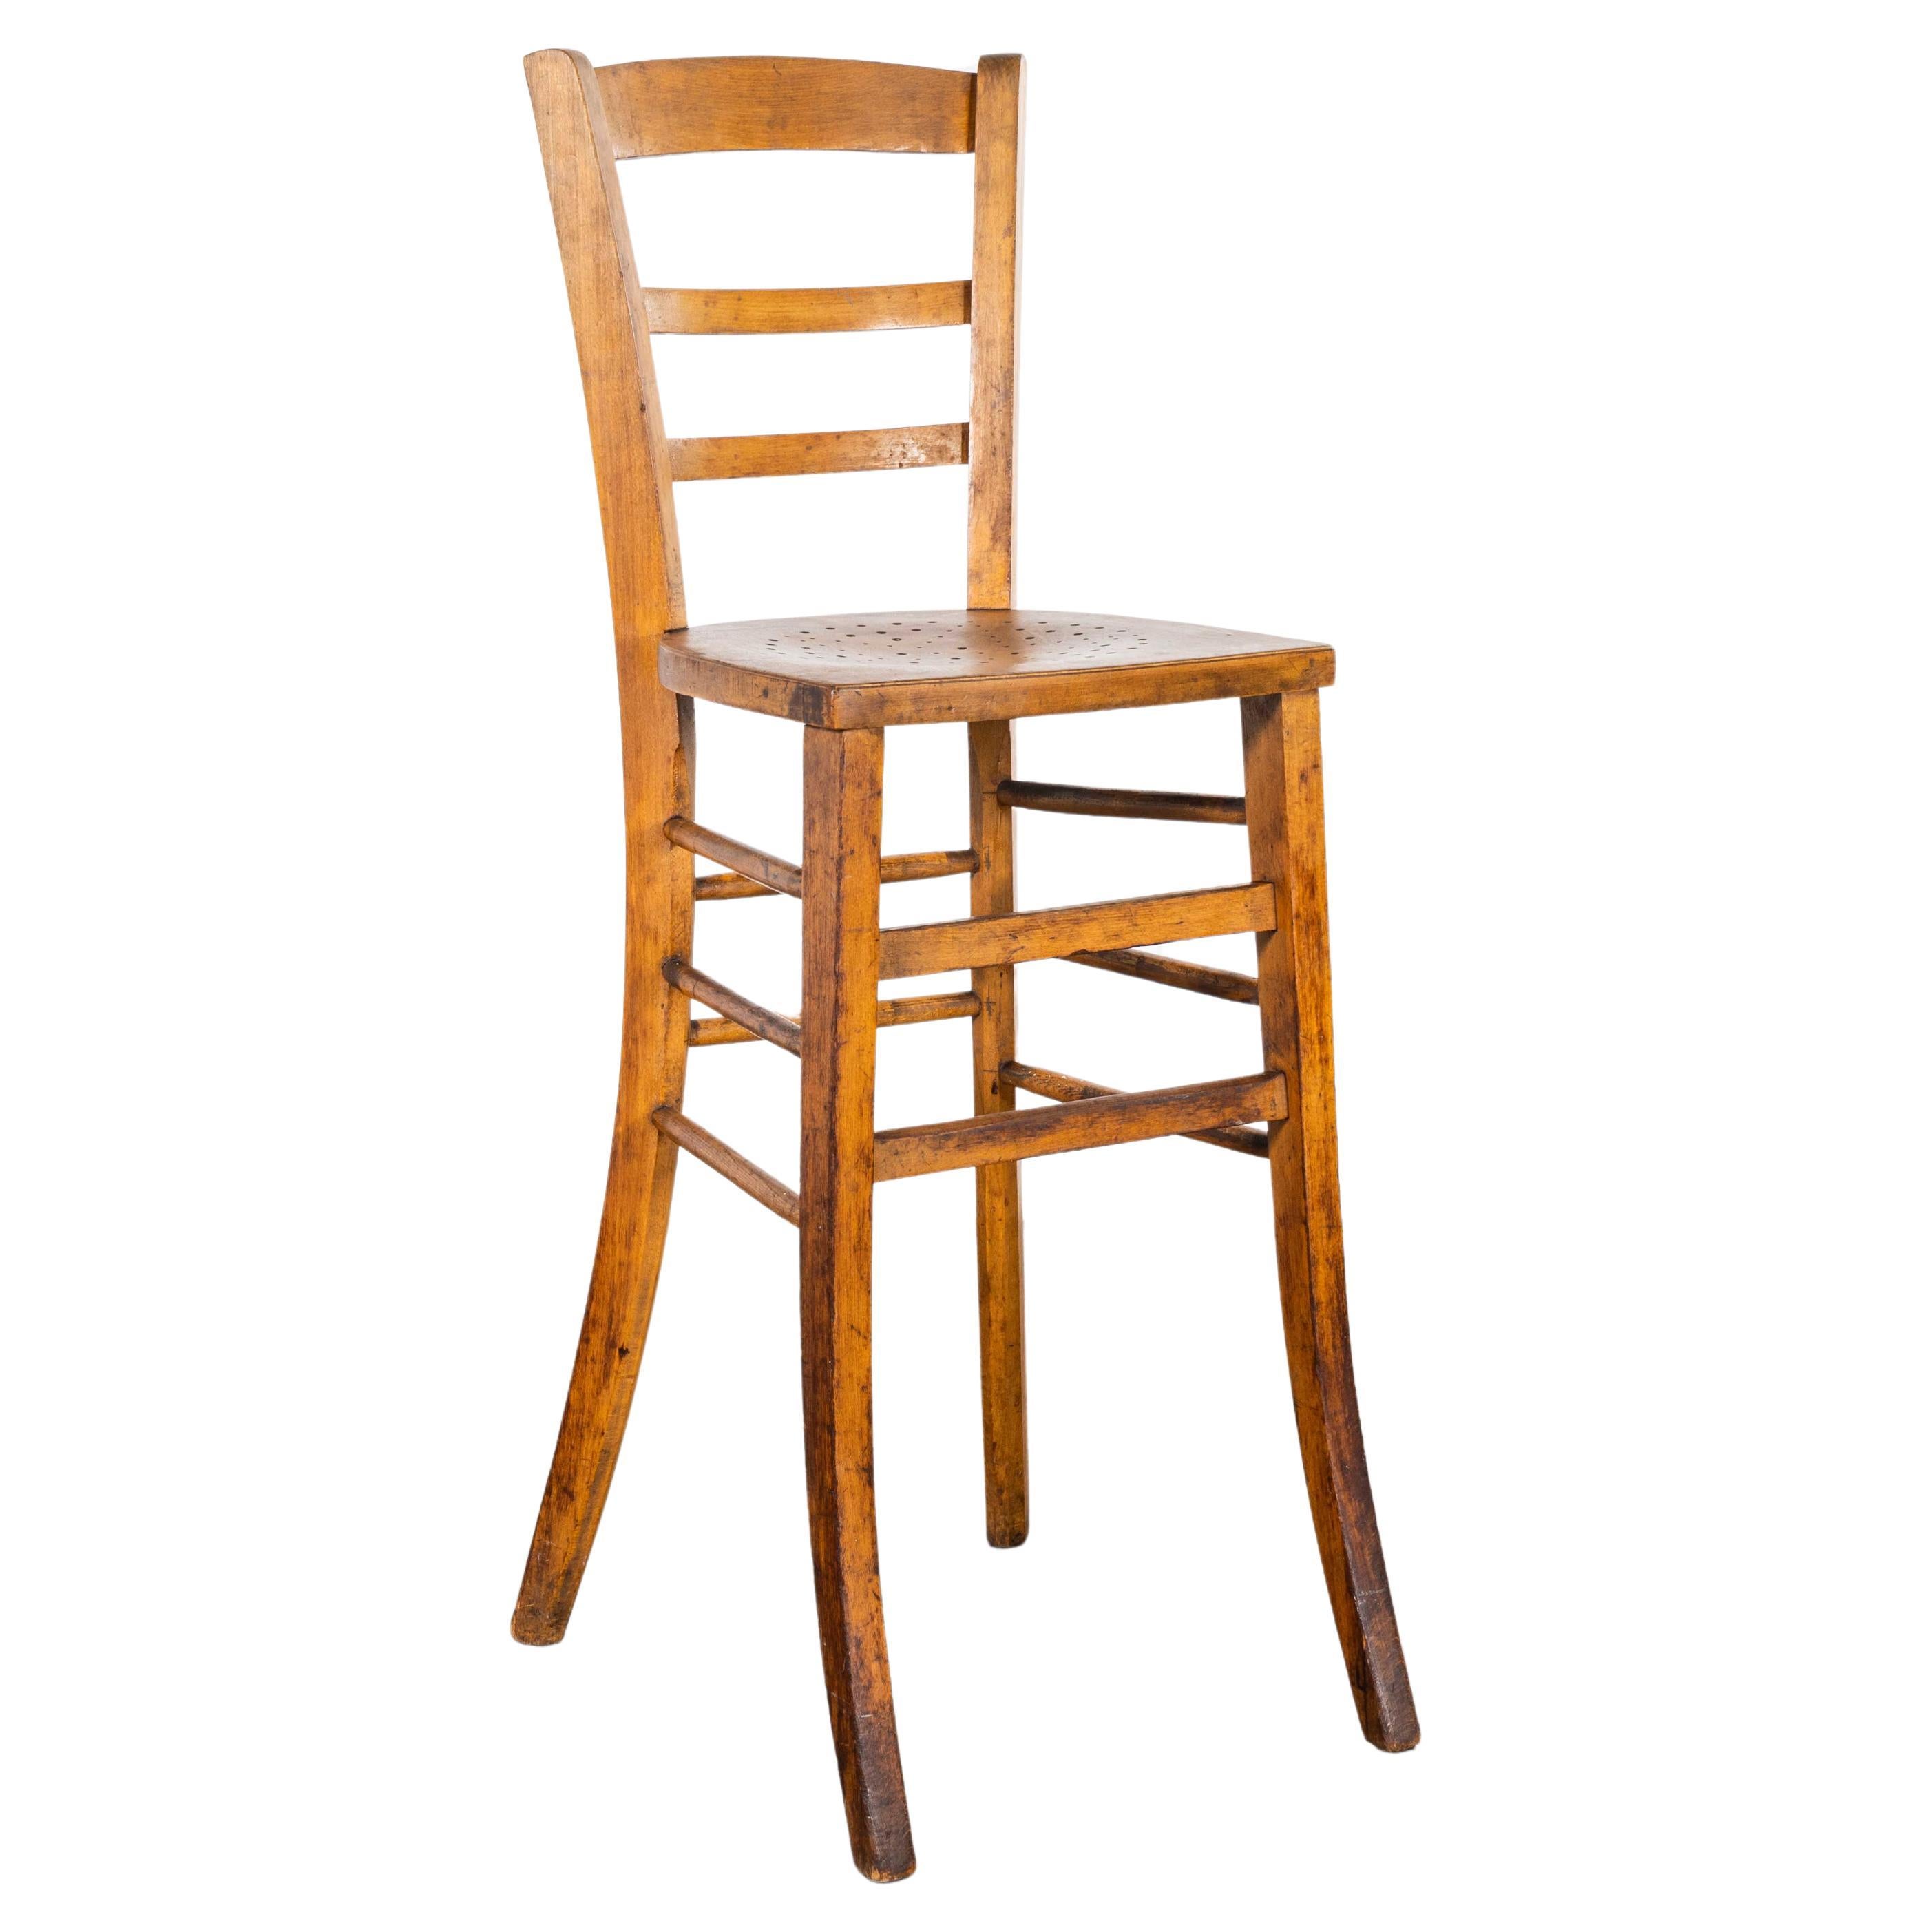 1950's French Luterma Blonde Bentwood Dining Chair - Bar Chair For Sale